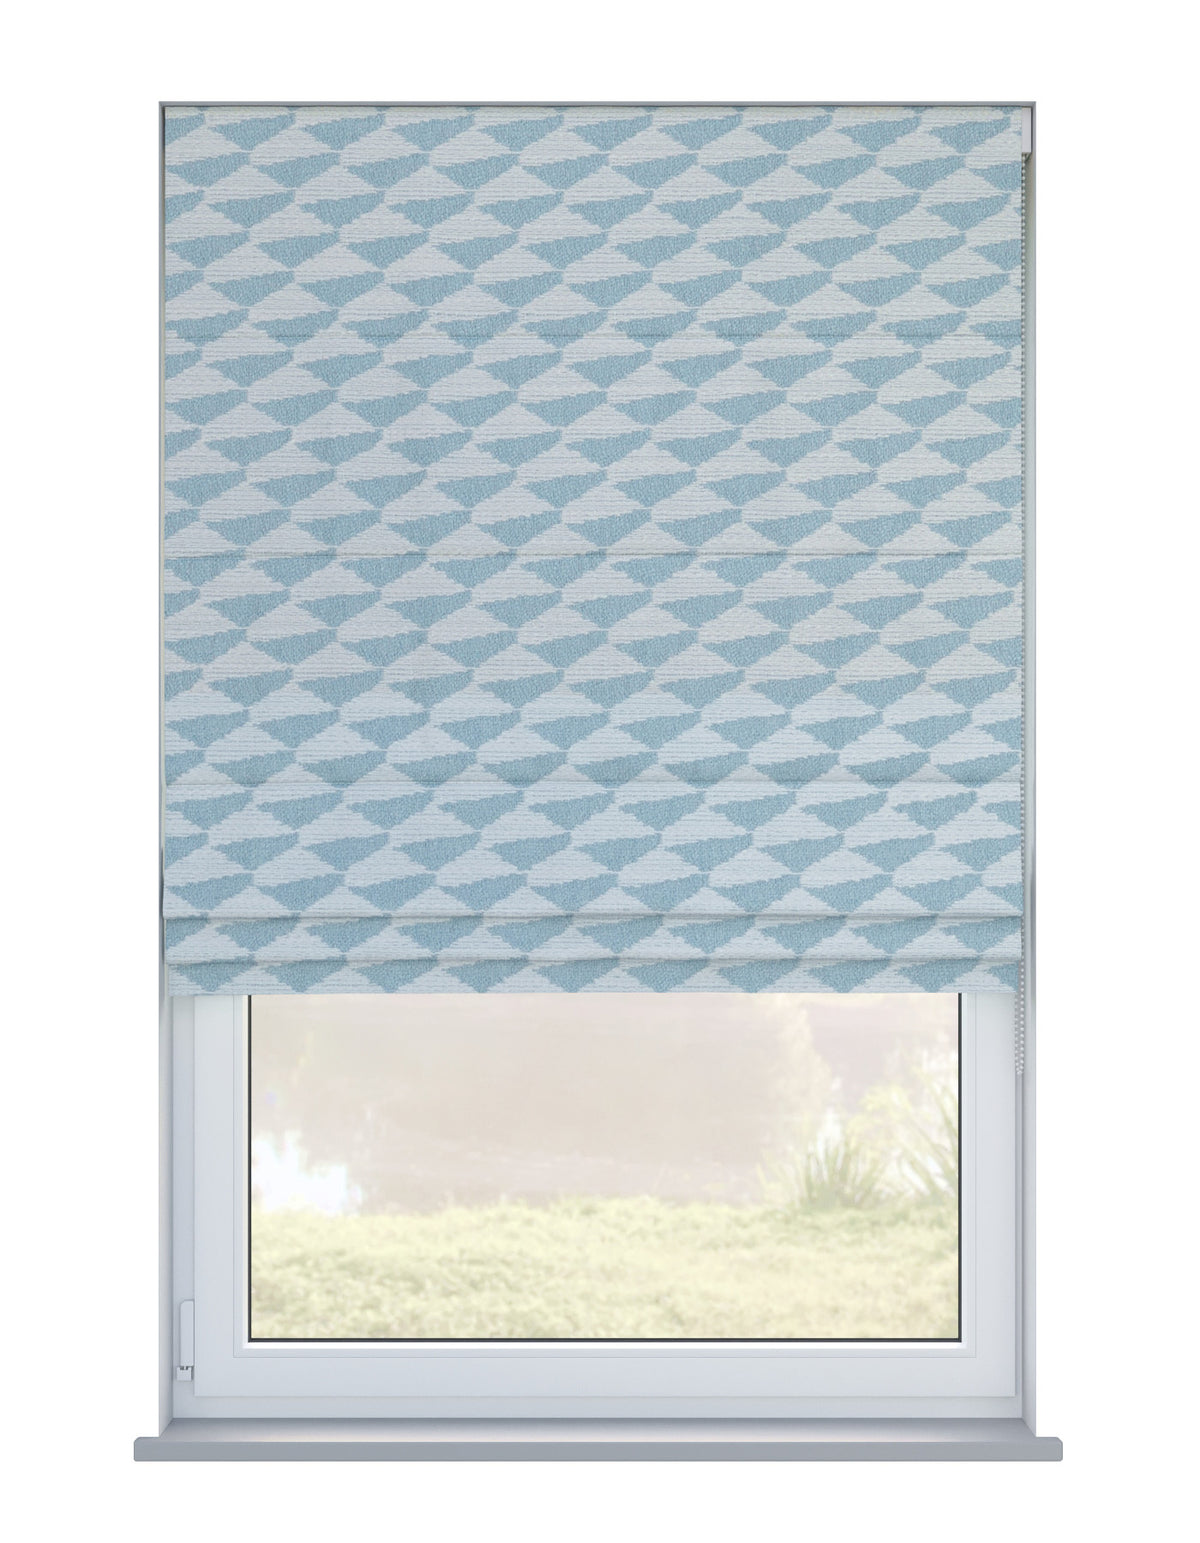 Arena Mode Mineral Roman Blind